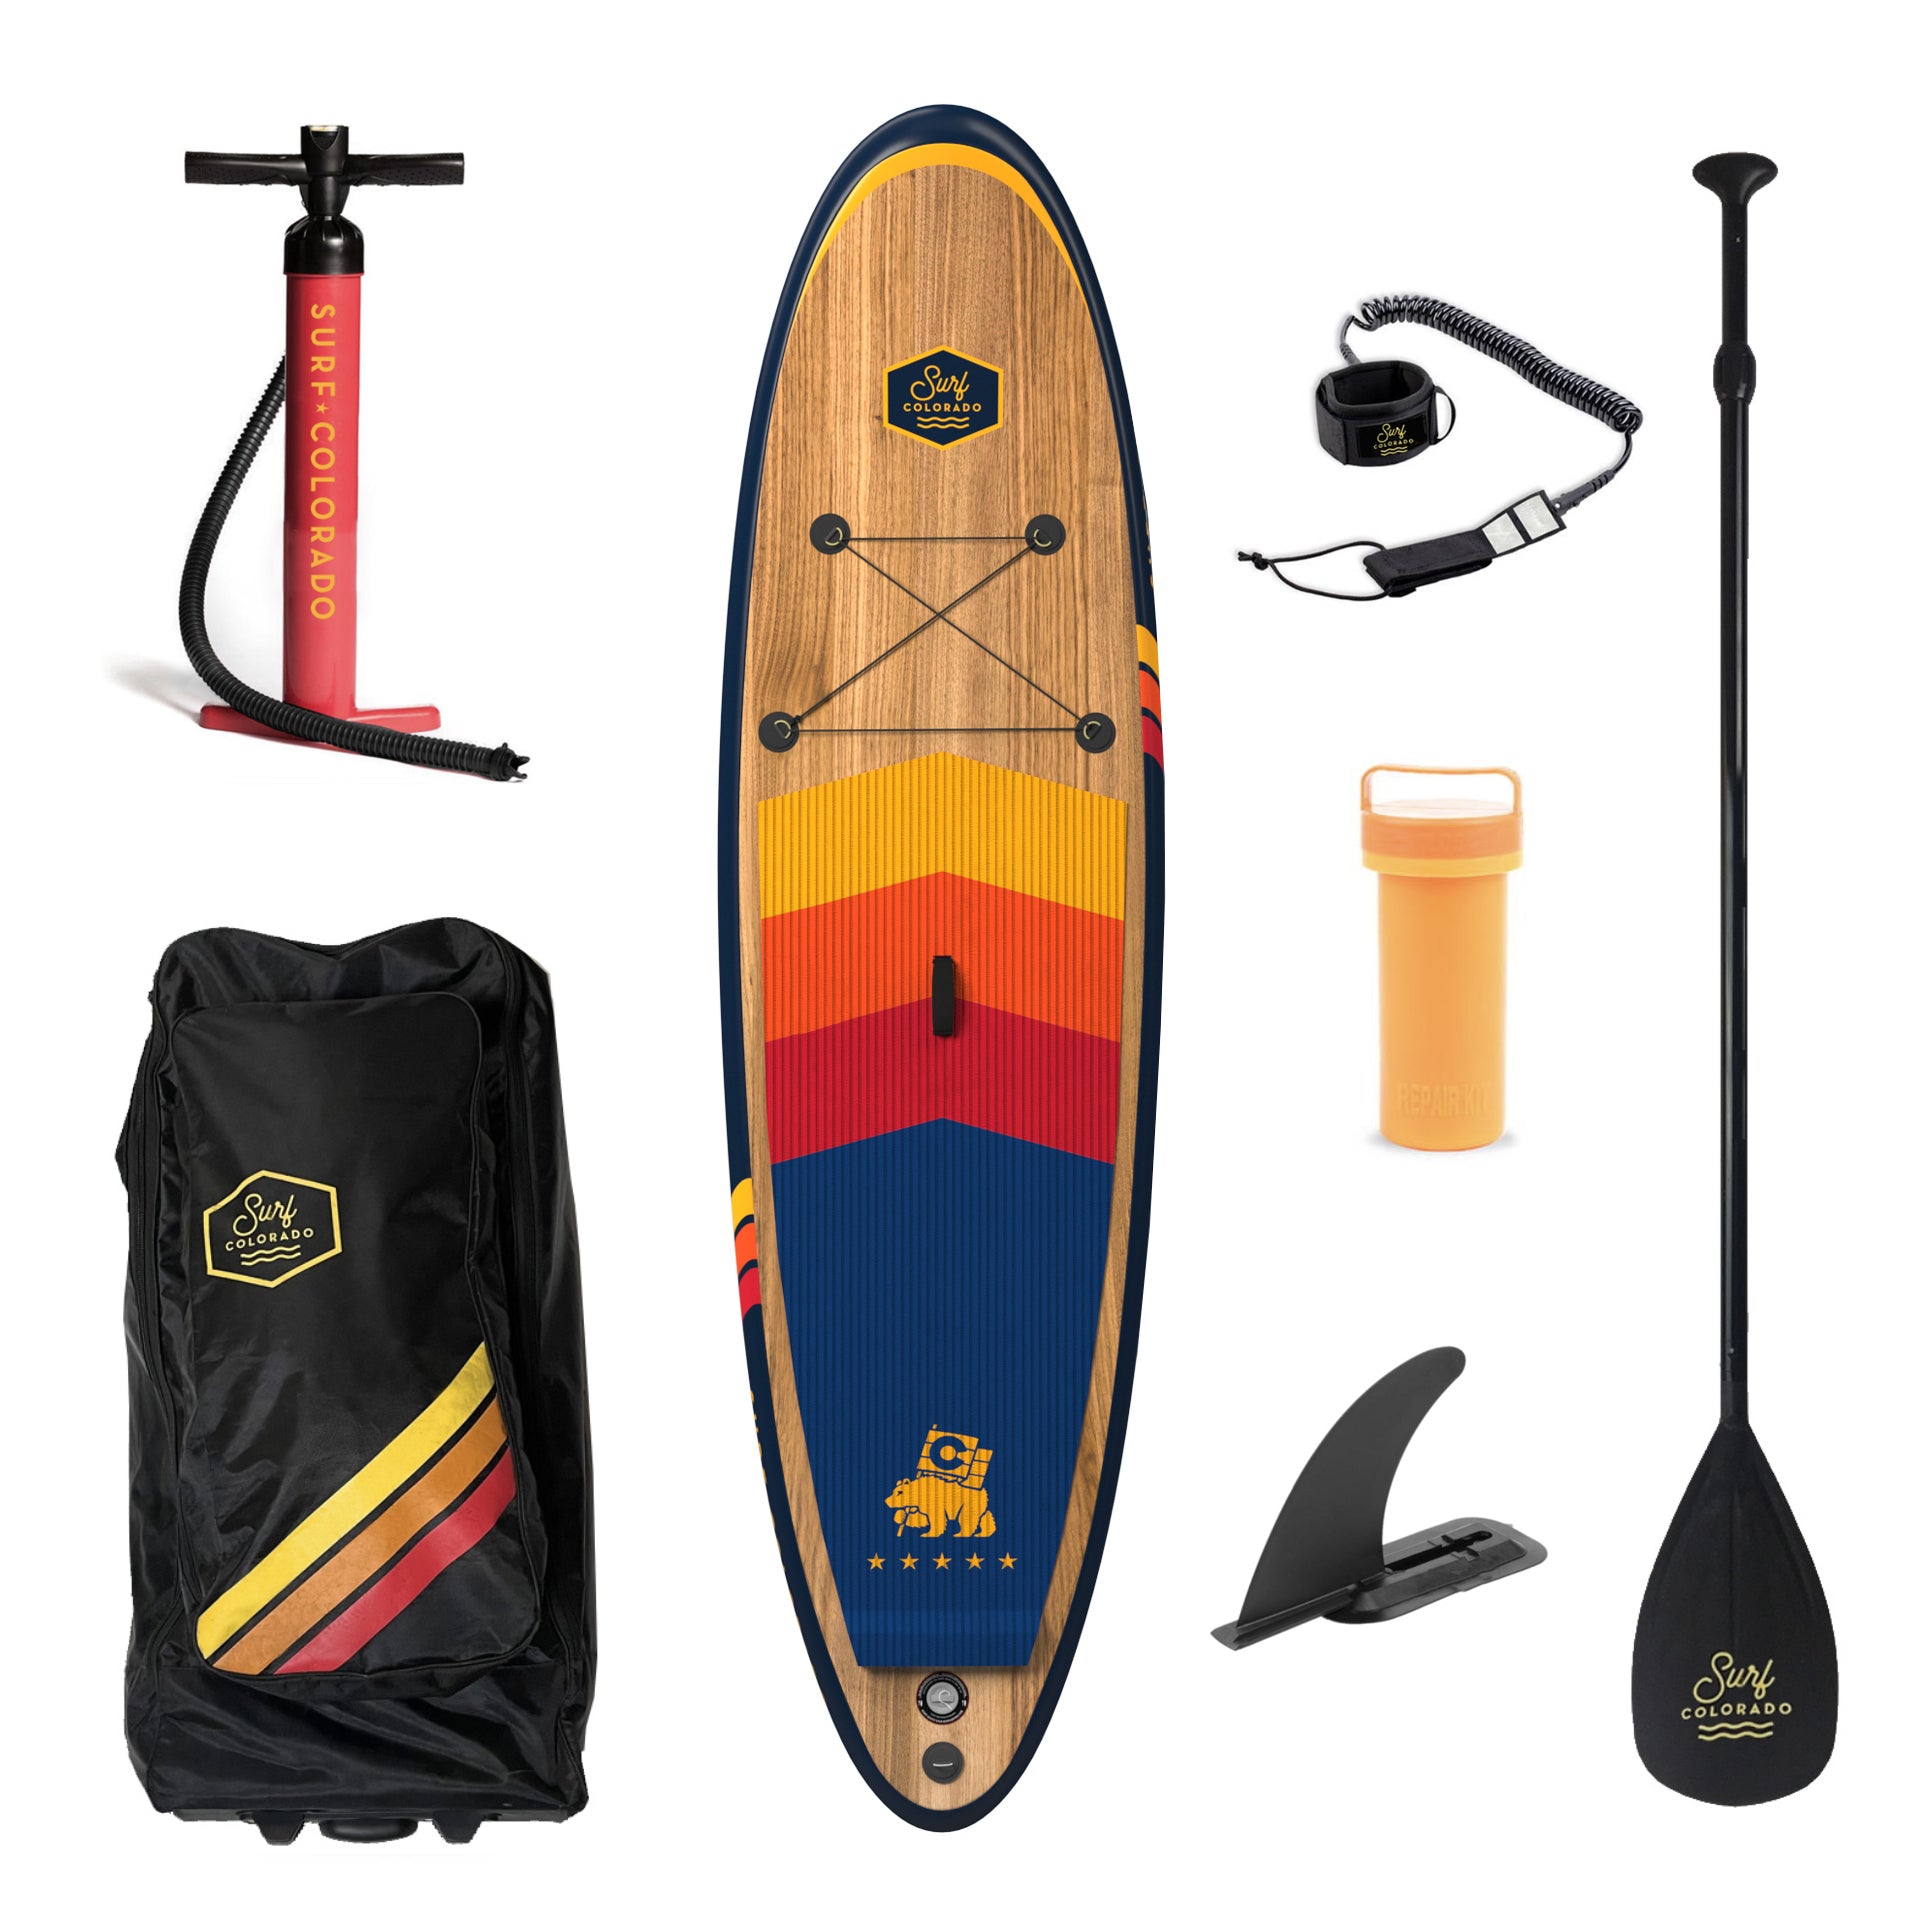 North Star Inflatable Stand Up Paddle Board Kit